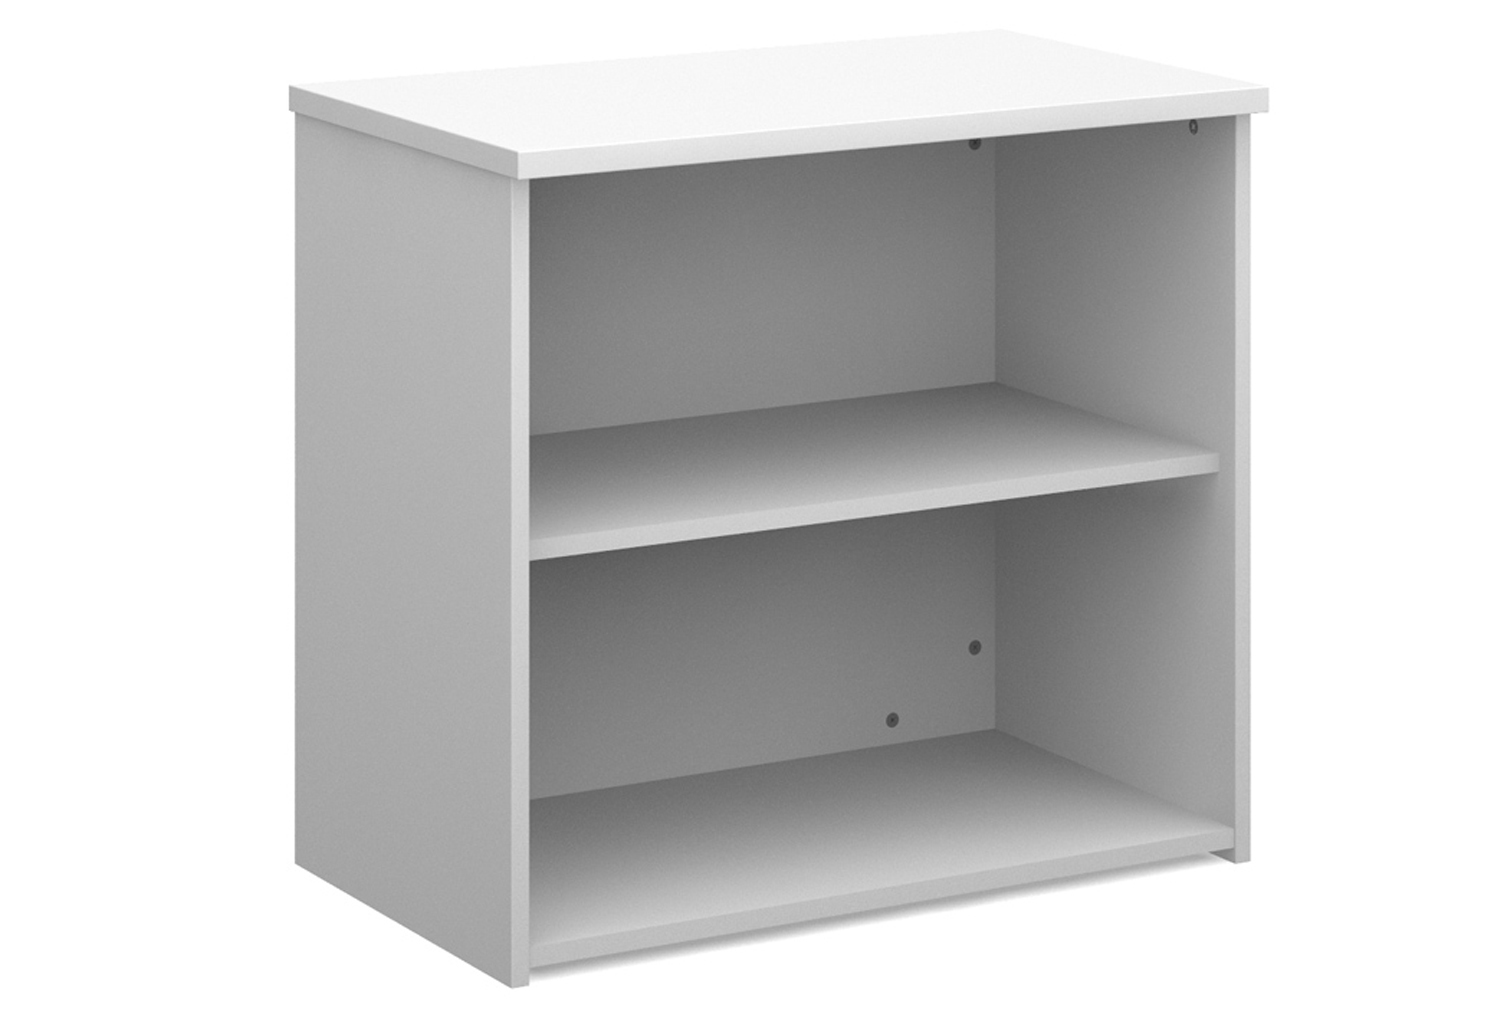 Tully Office Bookcases, 1 Shelf - 80wx47dx74h (cm), White